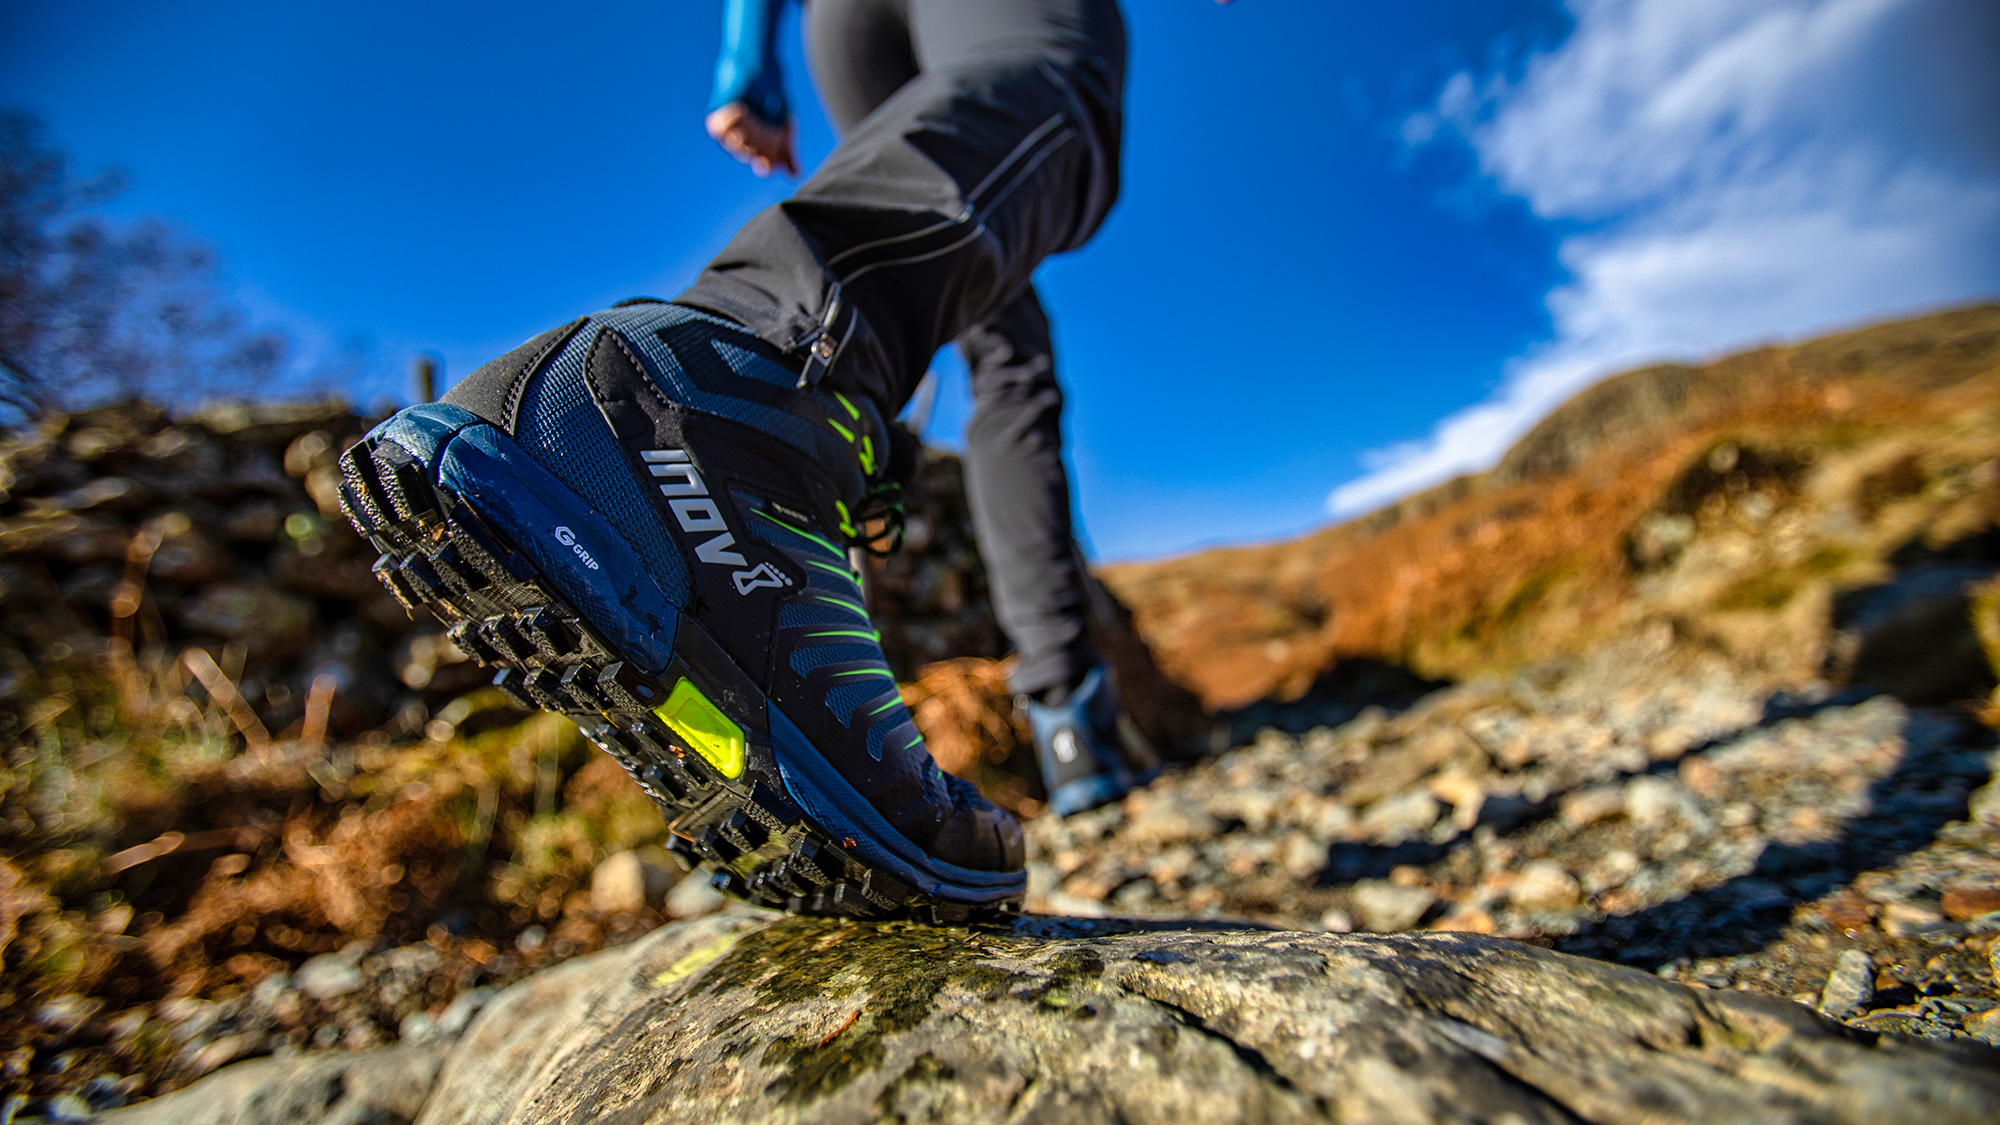 Best hiking boots 2020: Comfy, rugged 